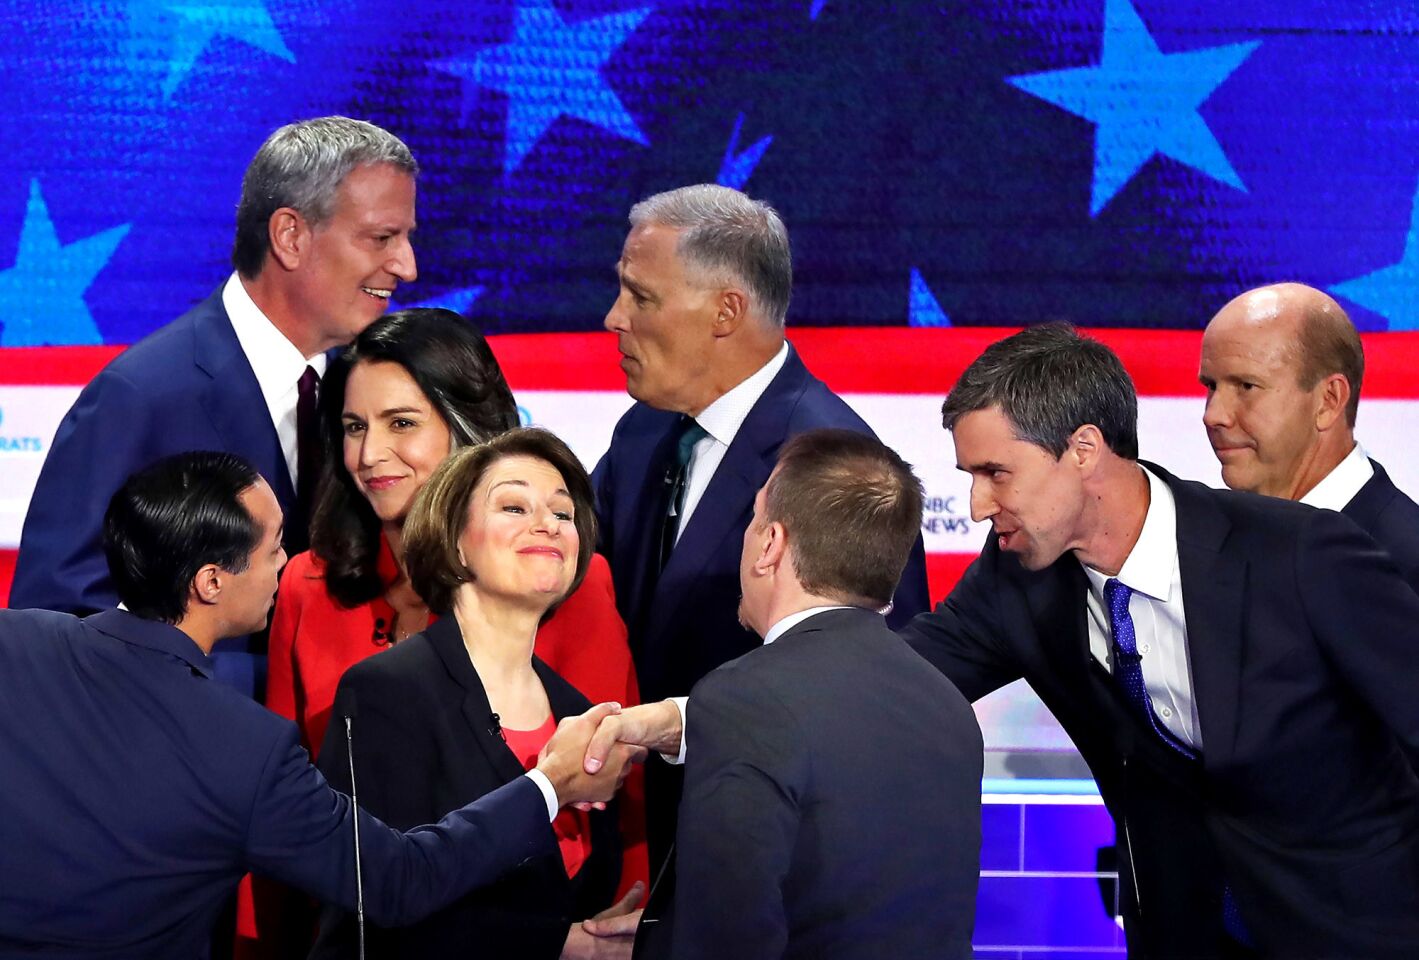 Chuck Todd of NBC News greets Sen. Amy Klobuchar (D-MN), former housing secretary Julian Castro, former Texas congressman Beto O'Rourke and other candidates after the first night of the Democratic presidential debate on June 26, 2019 in Miami, Florida. A field of 20 Democratic presidential candidates was split into two groups of 10 for the first debate of the 2020 election, taking place over two nights at Knight Concert Hall of the Adrienne Arsht Center for the Performing Arts of Miami-Dade County, hosted by NBC News, MSNBC, and Telemundo.